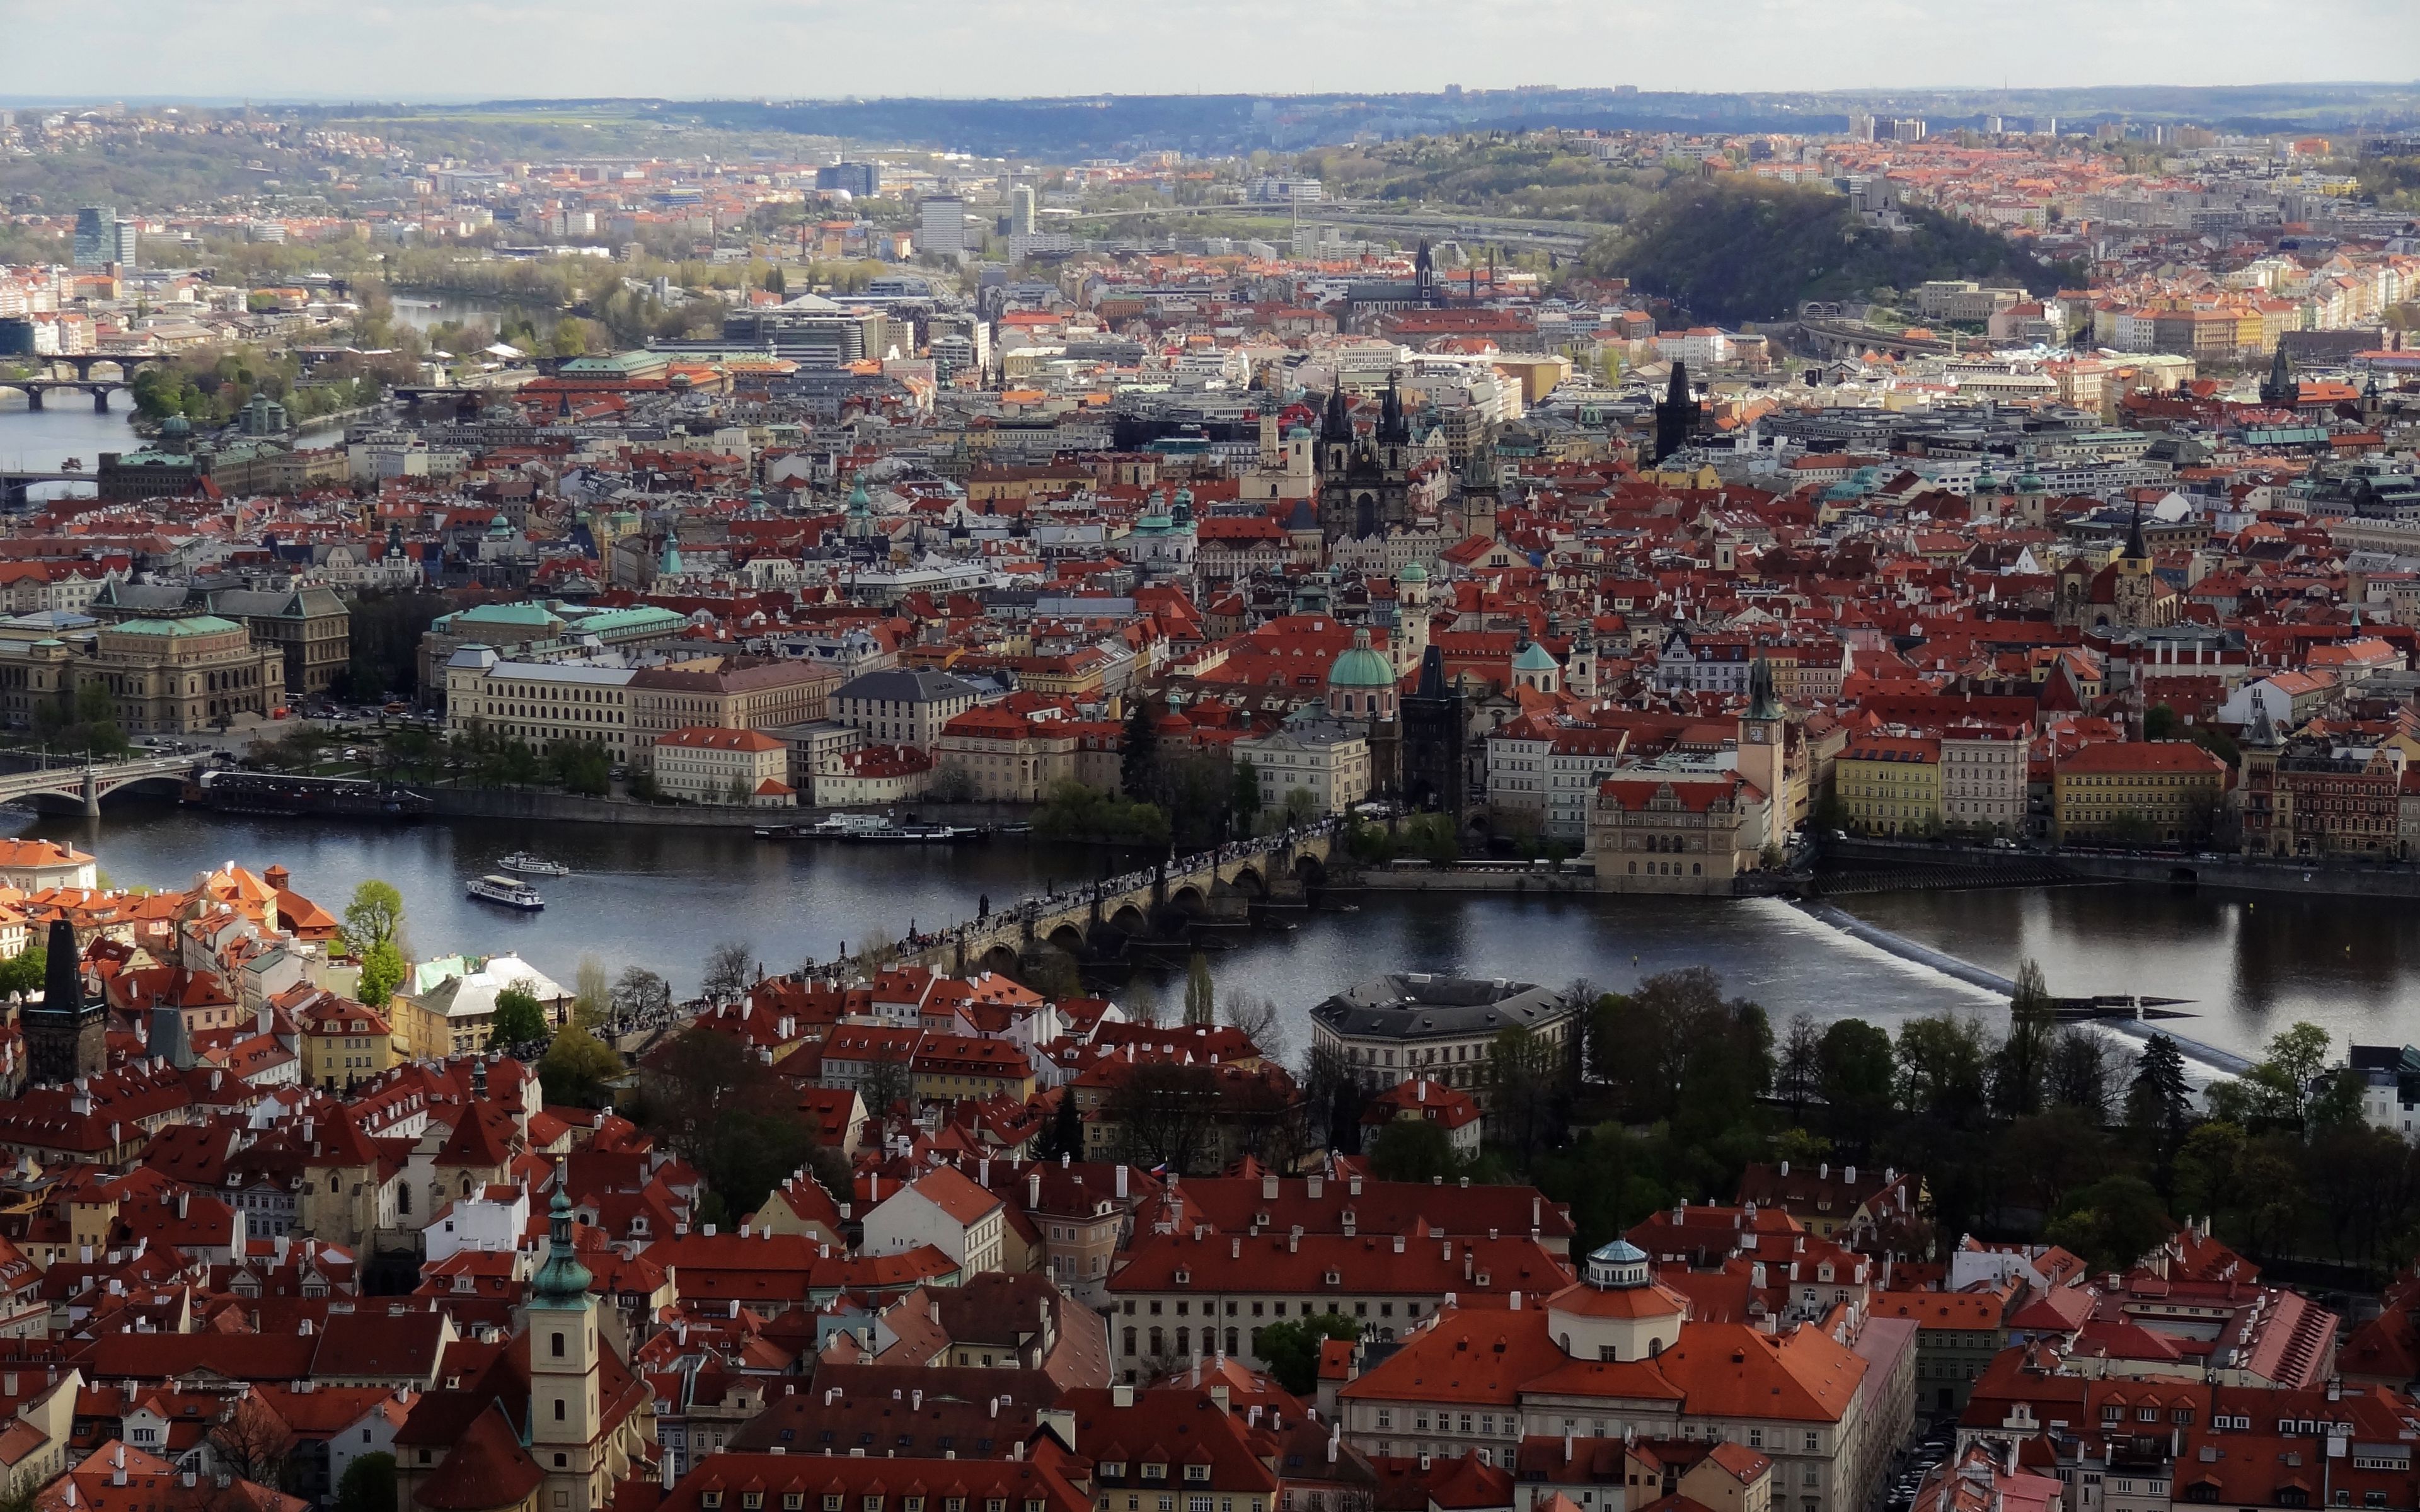 Download wallpaper 3840x2400 city, buildings, architecture, roofs, prague 4k ultra HD 16:10 HD background